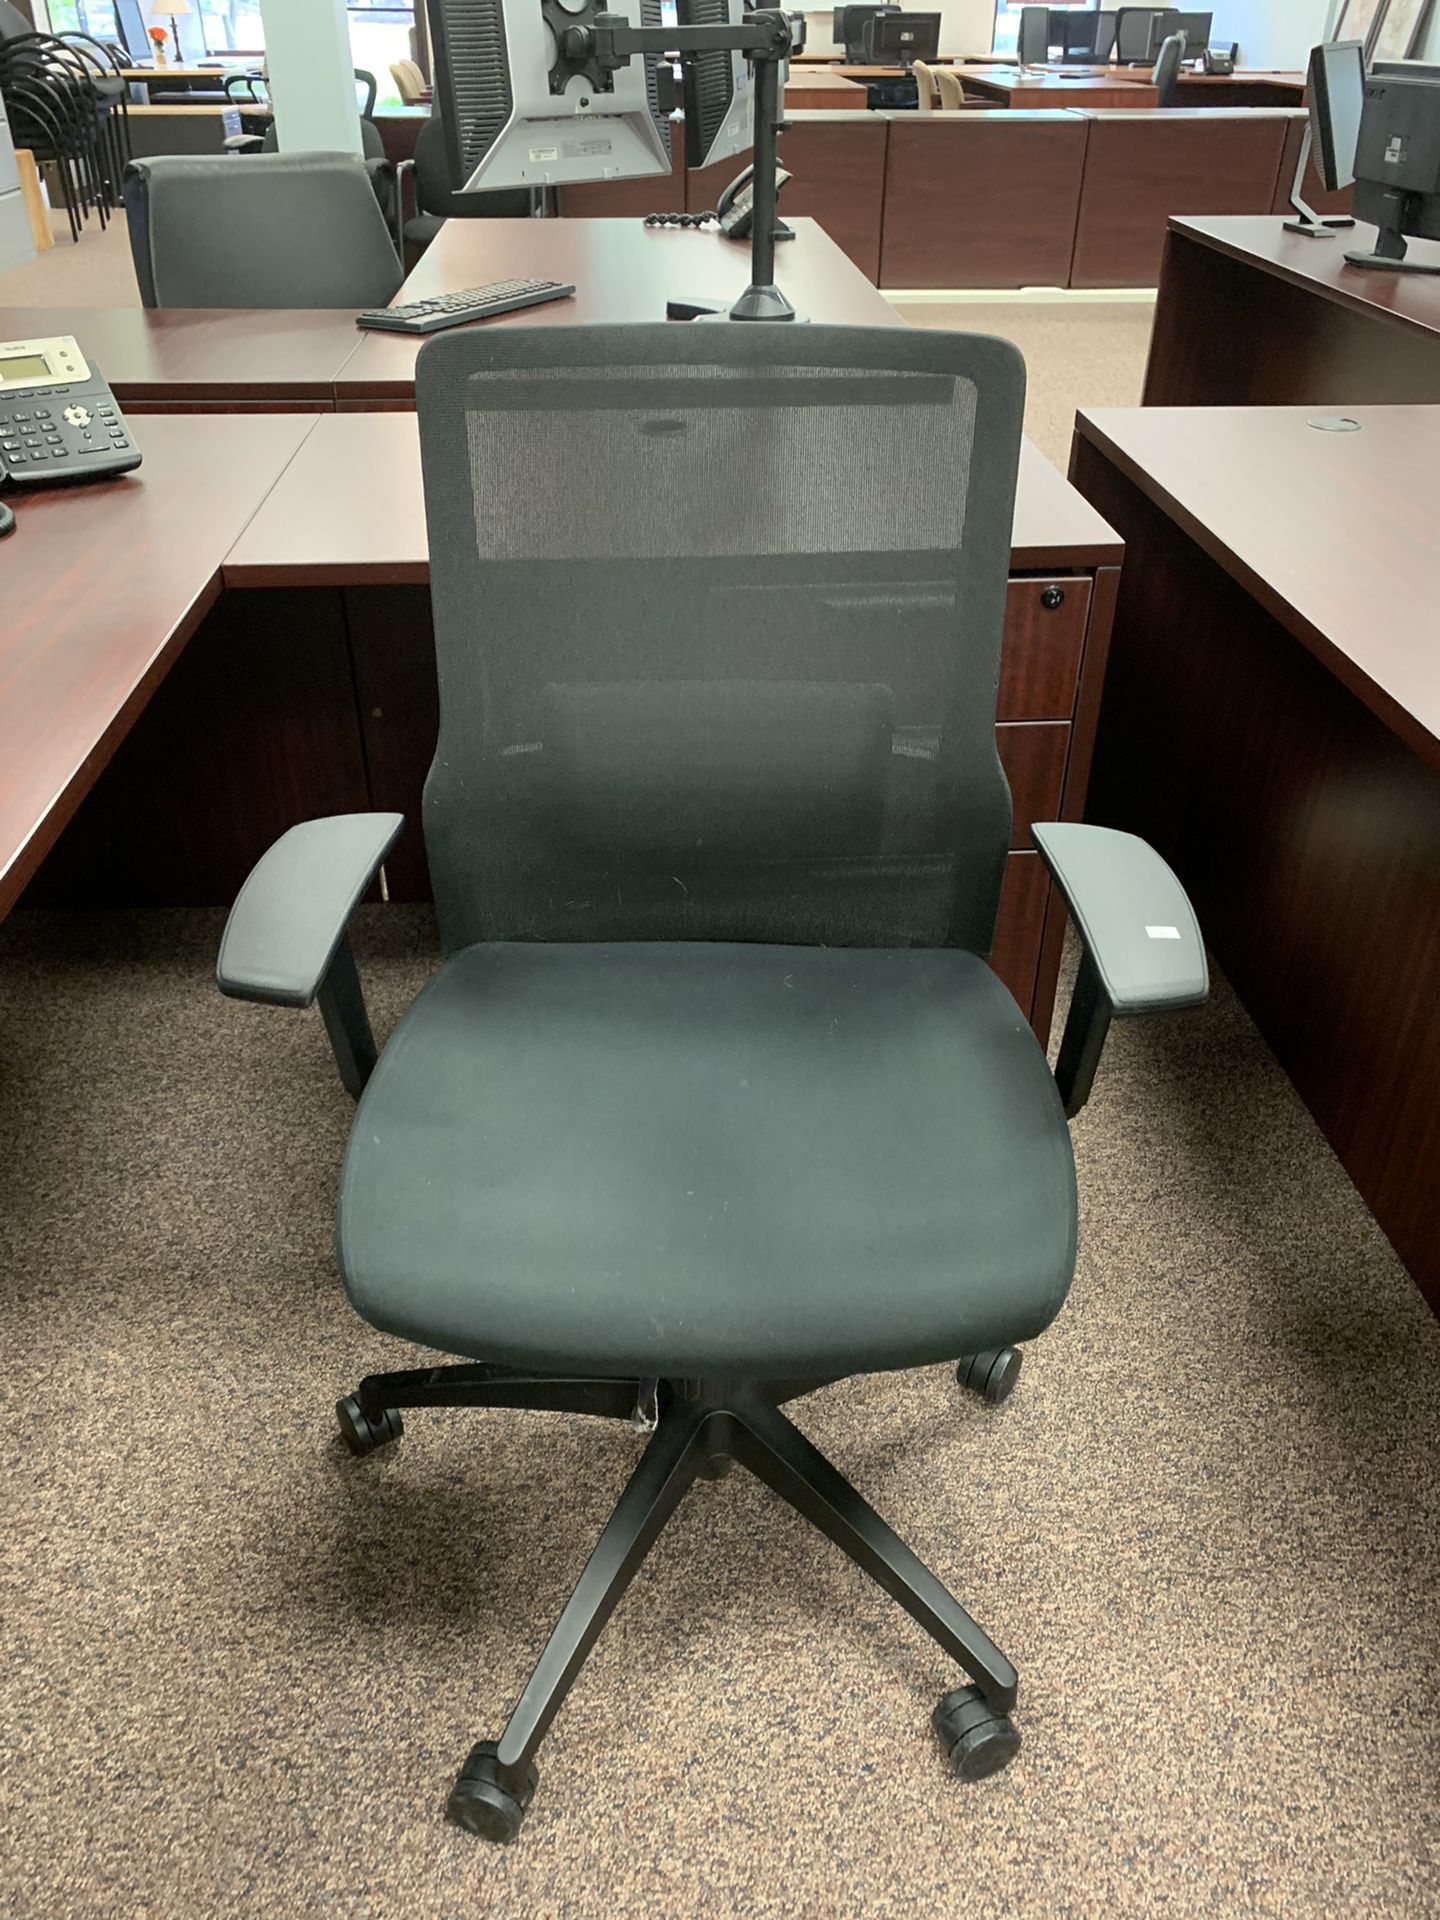 Mesh office chair with lumbar support